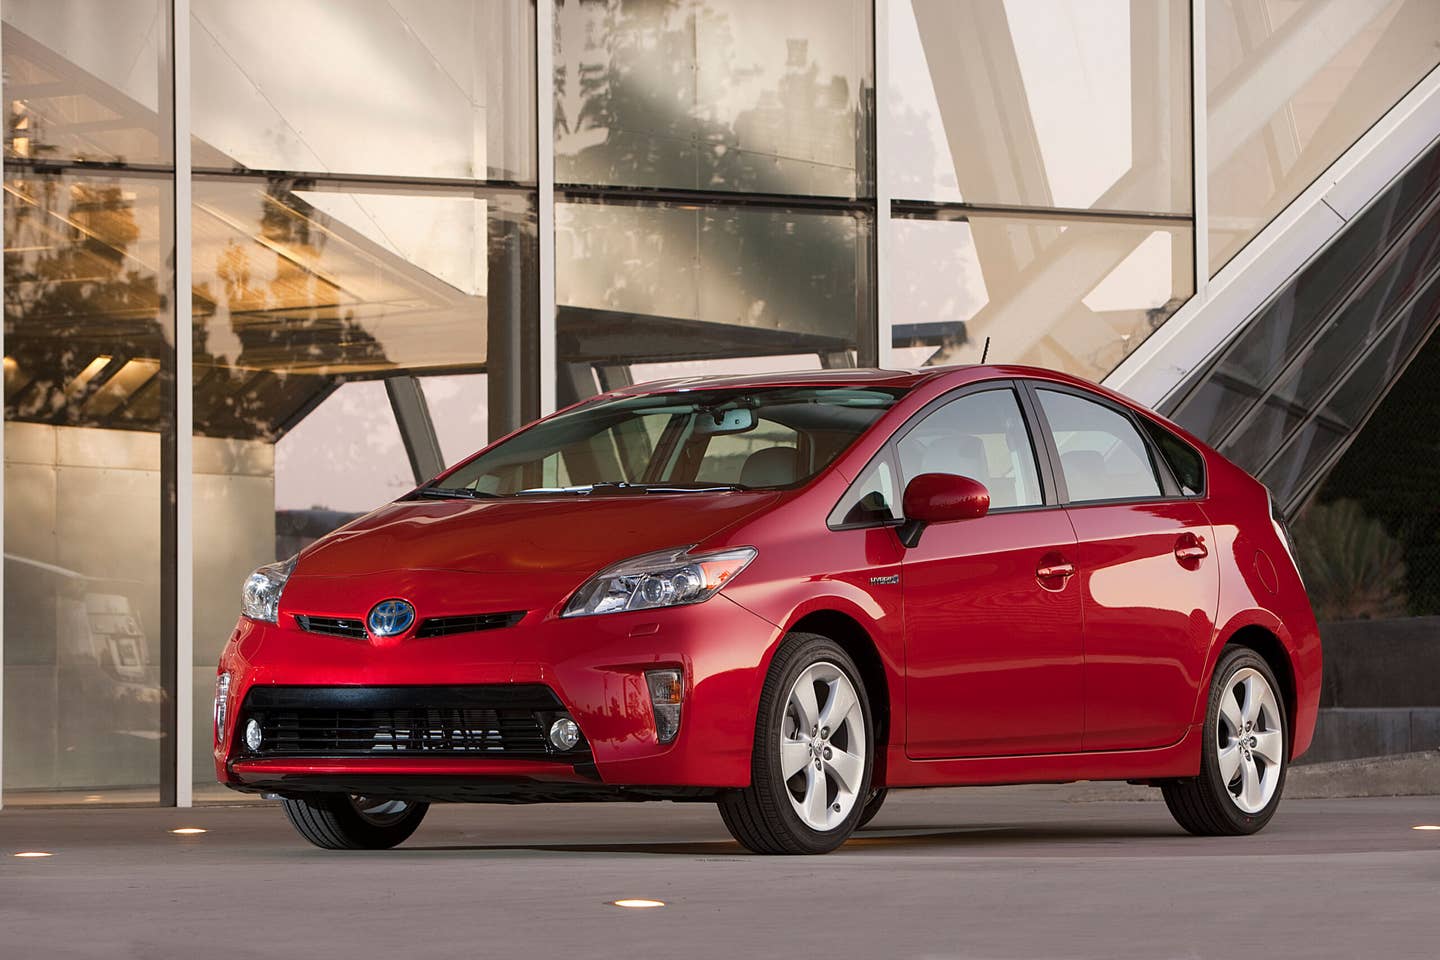 The 2012 Toyota Prius came a close second to the Chevy Impala in the study results. <em>Toyota</em>